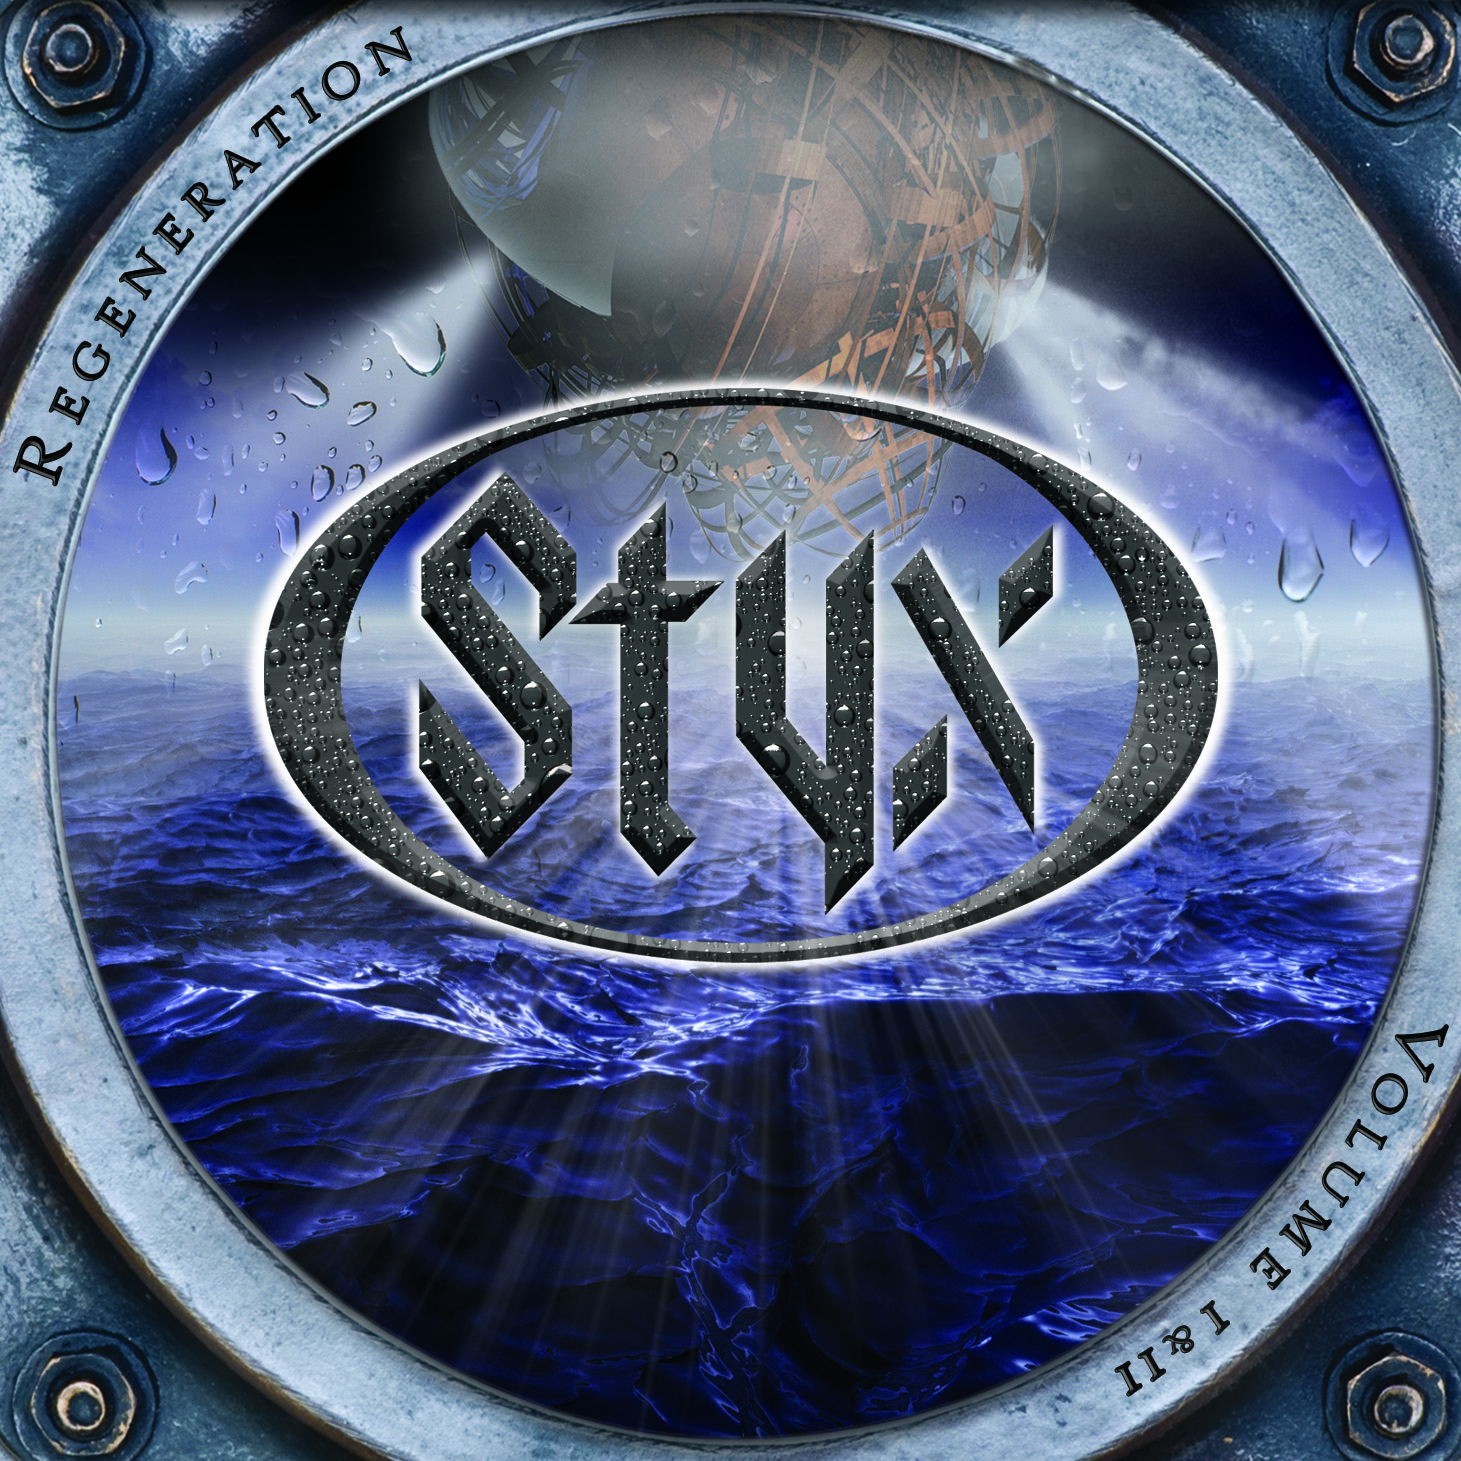 ps4 styx download